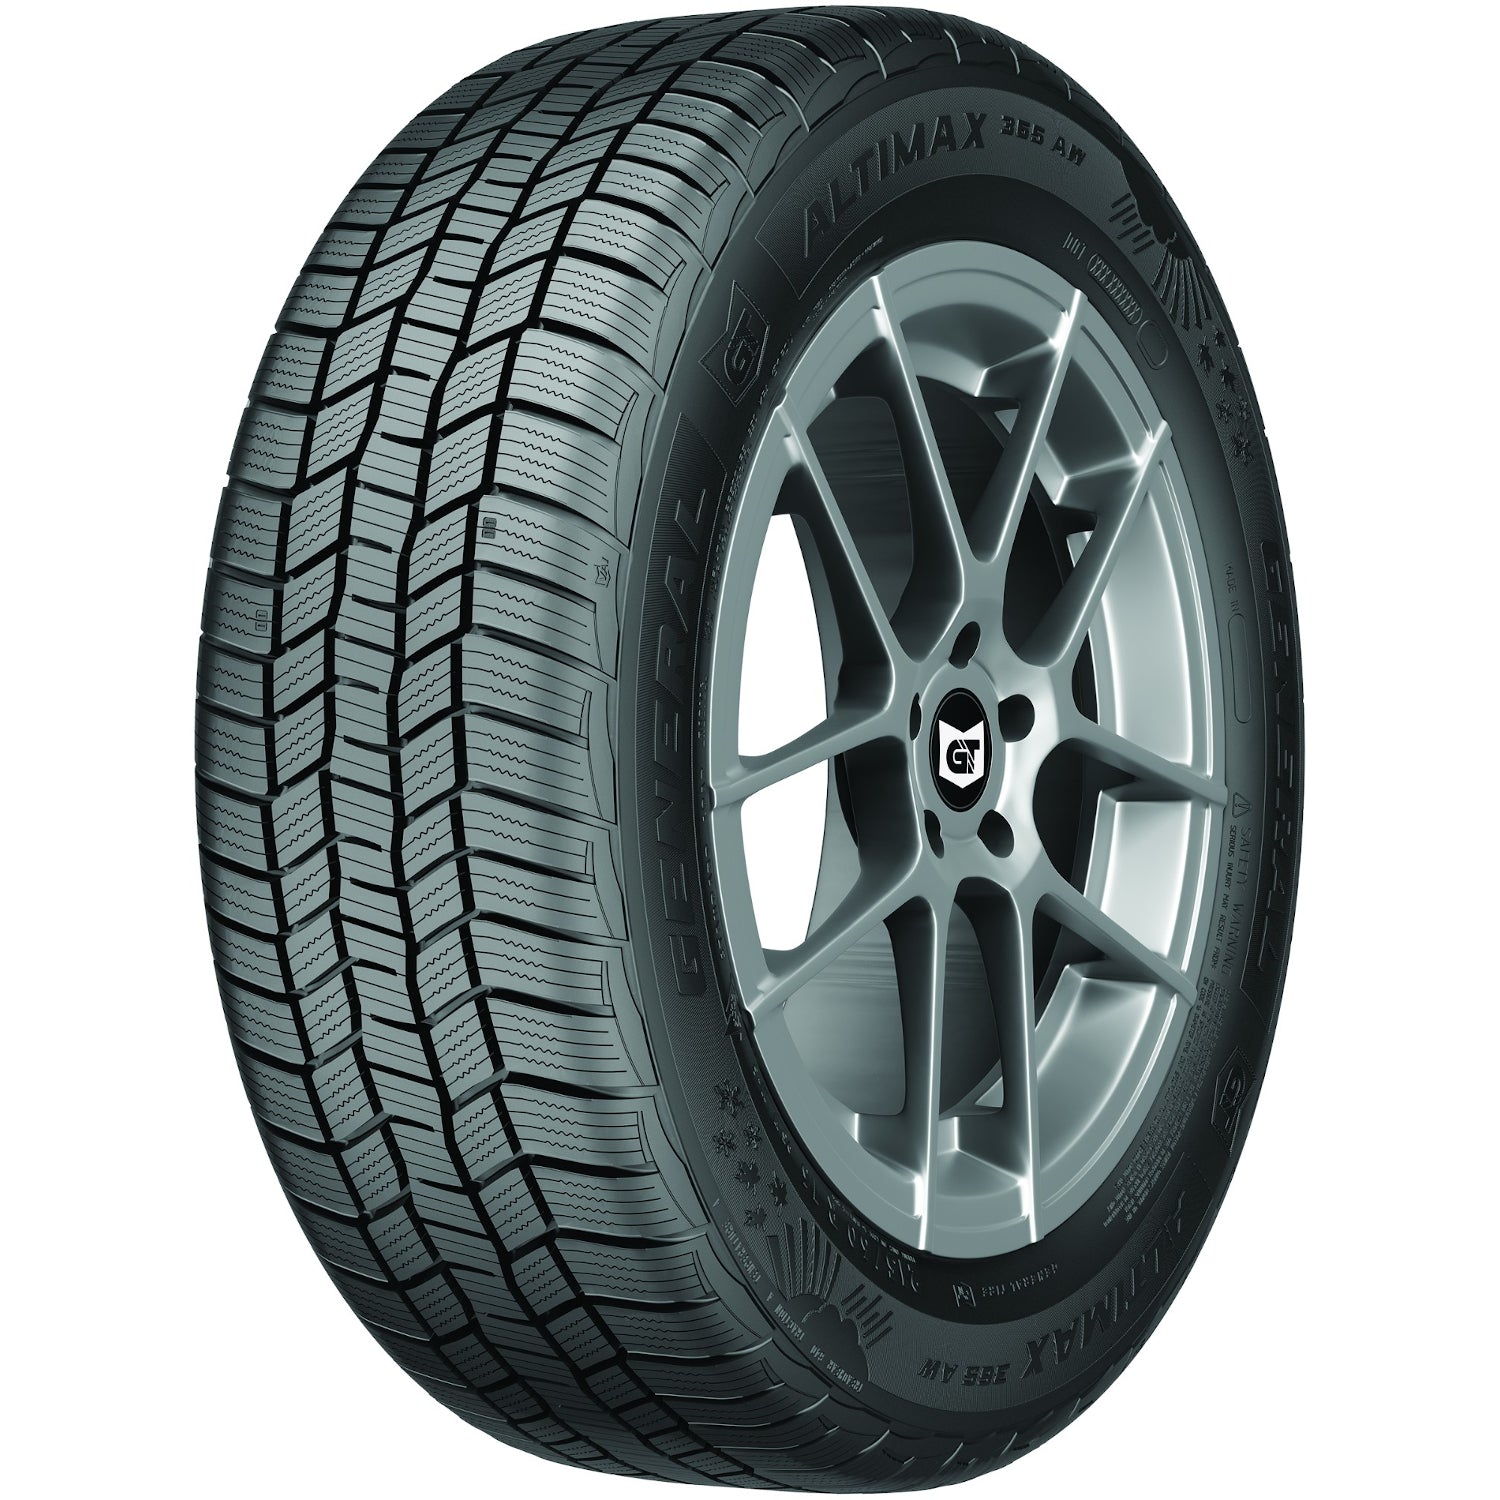 GENERAL ALTIMAX 365AW 215/55R16 (25.3X8.5R 16) Tires